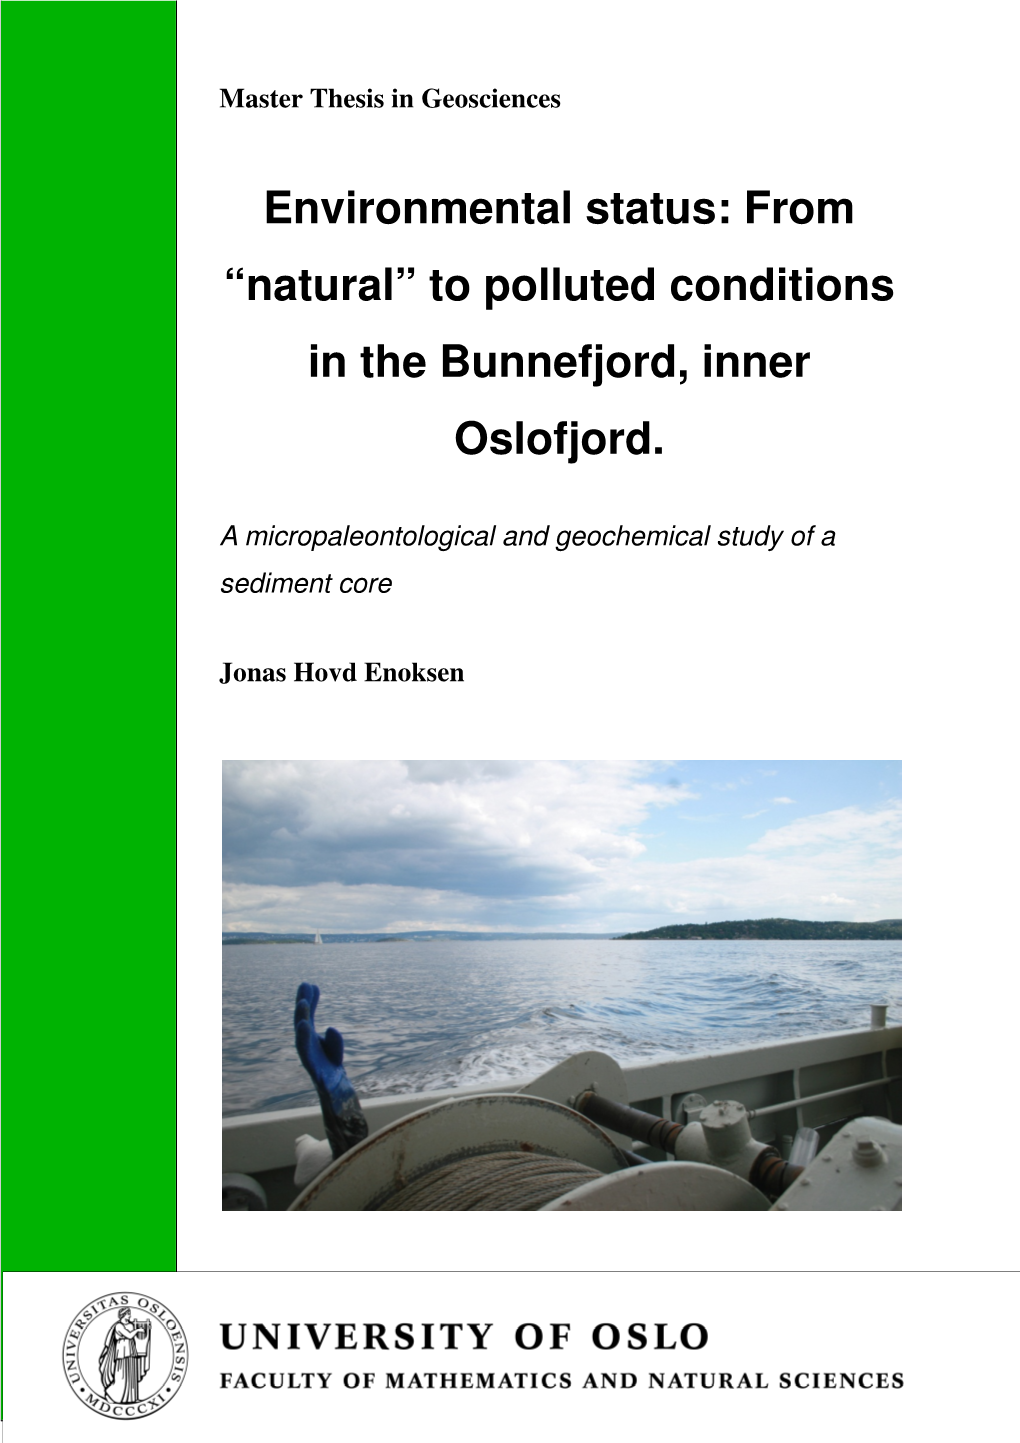 From “Natural” to Polluted Conditions in the Bunnefjord, Inner Oslofjord